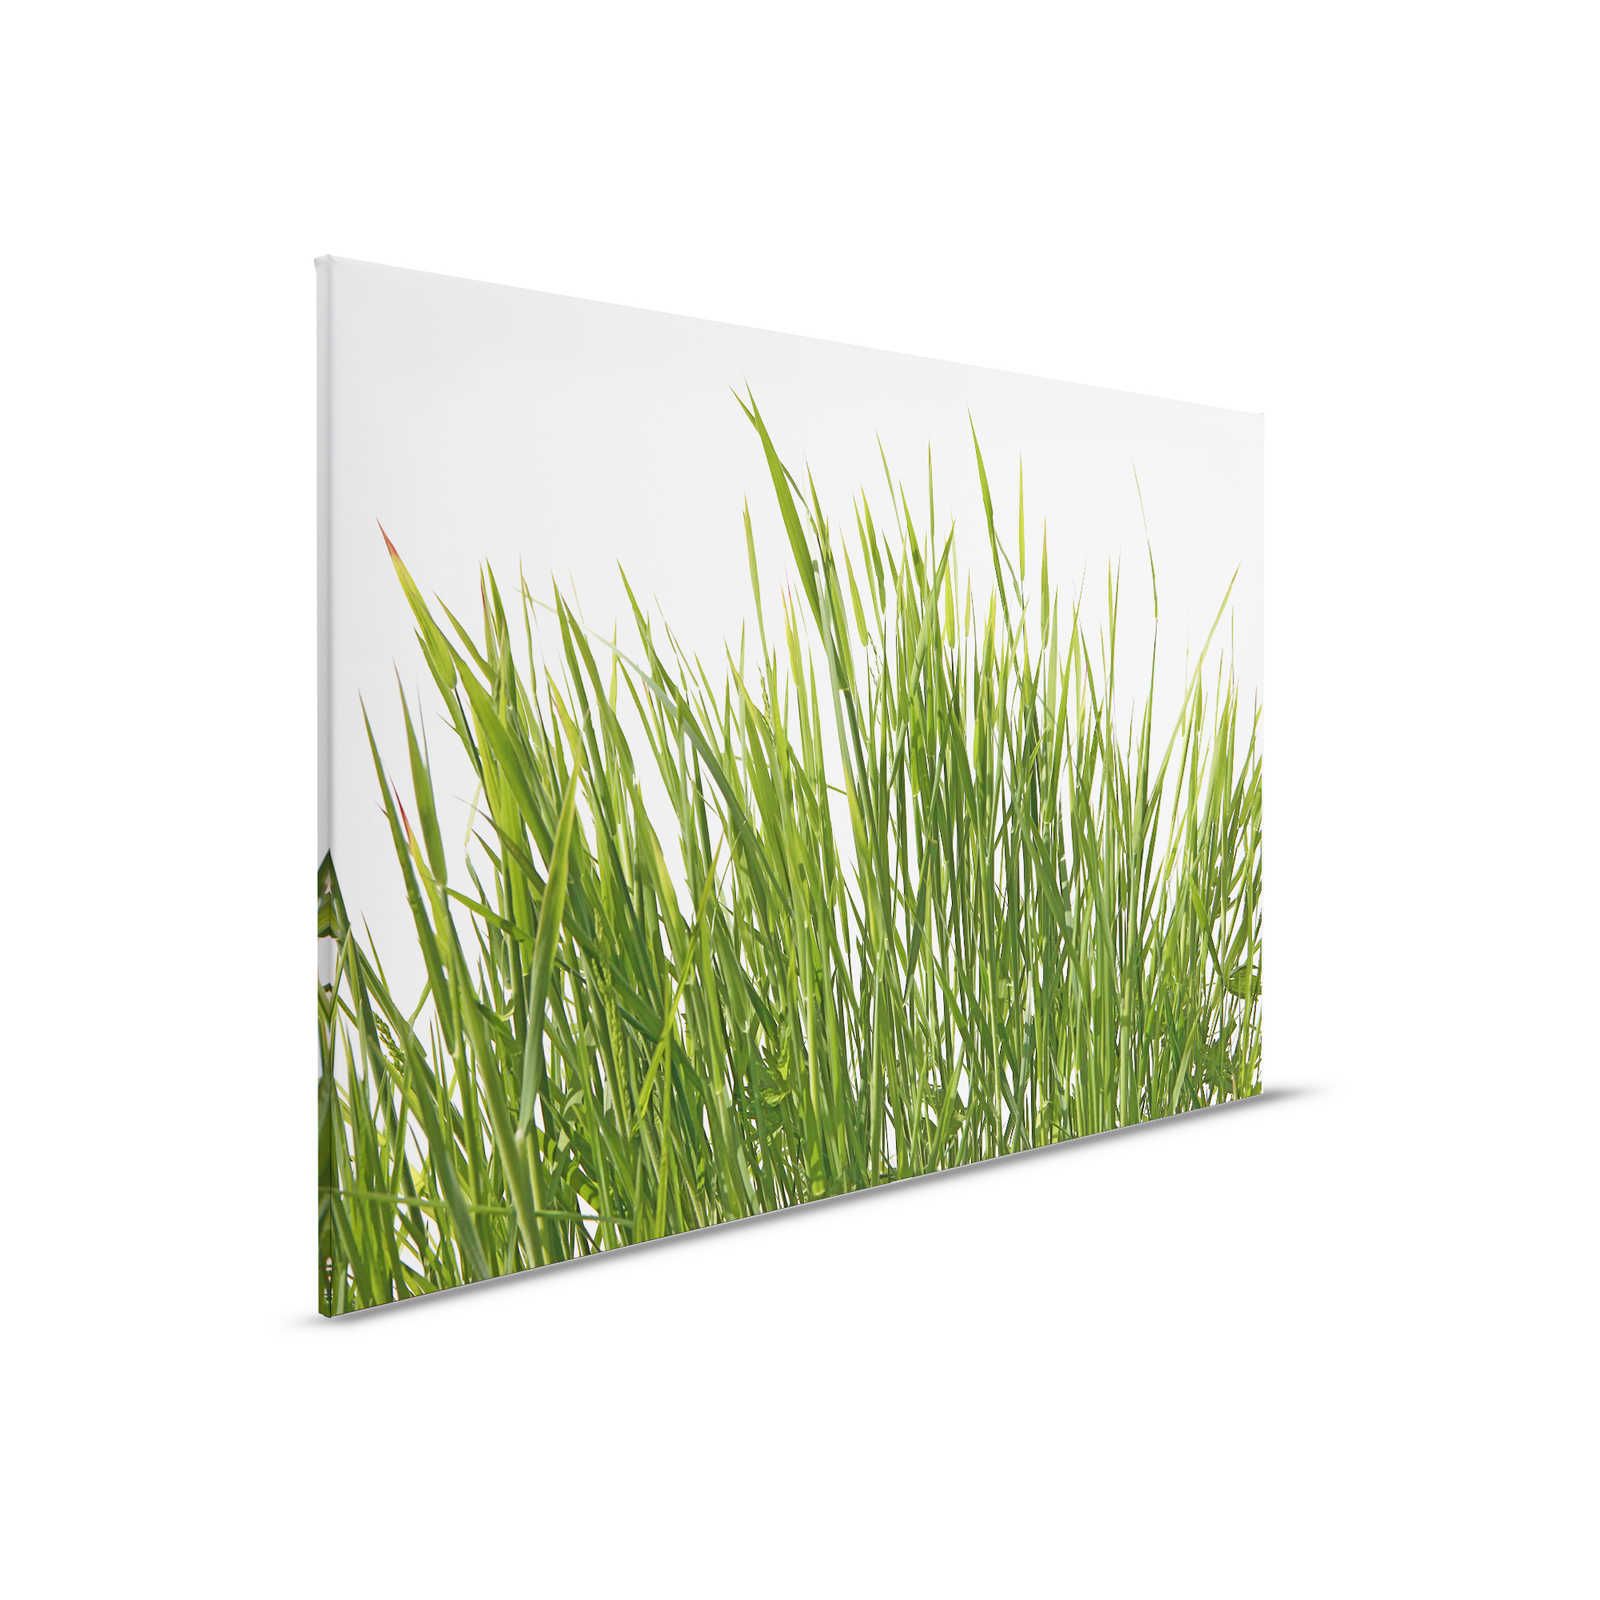         Canvas painting Grasses detail with white background - 0,90 m x 0,60 m
    